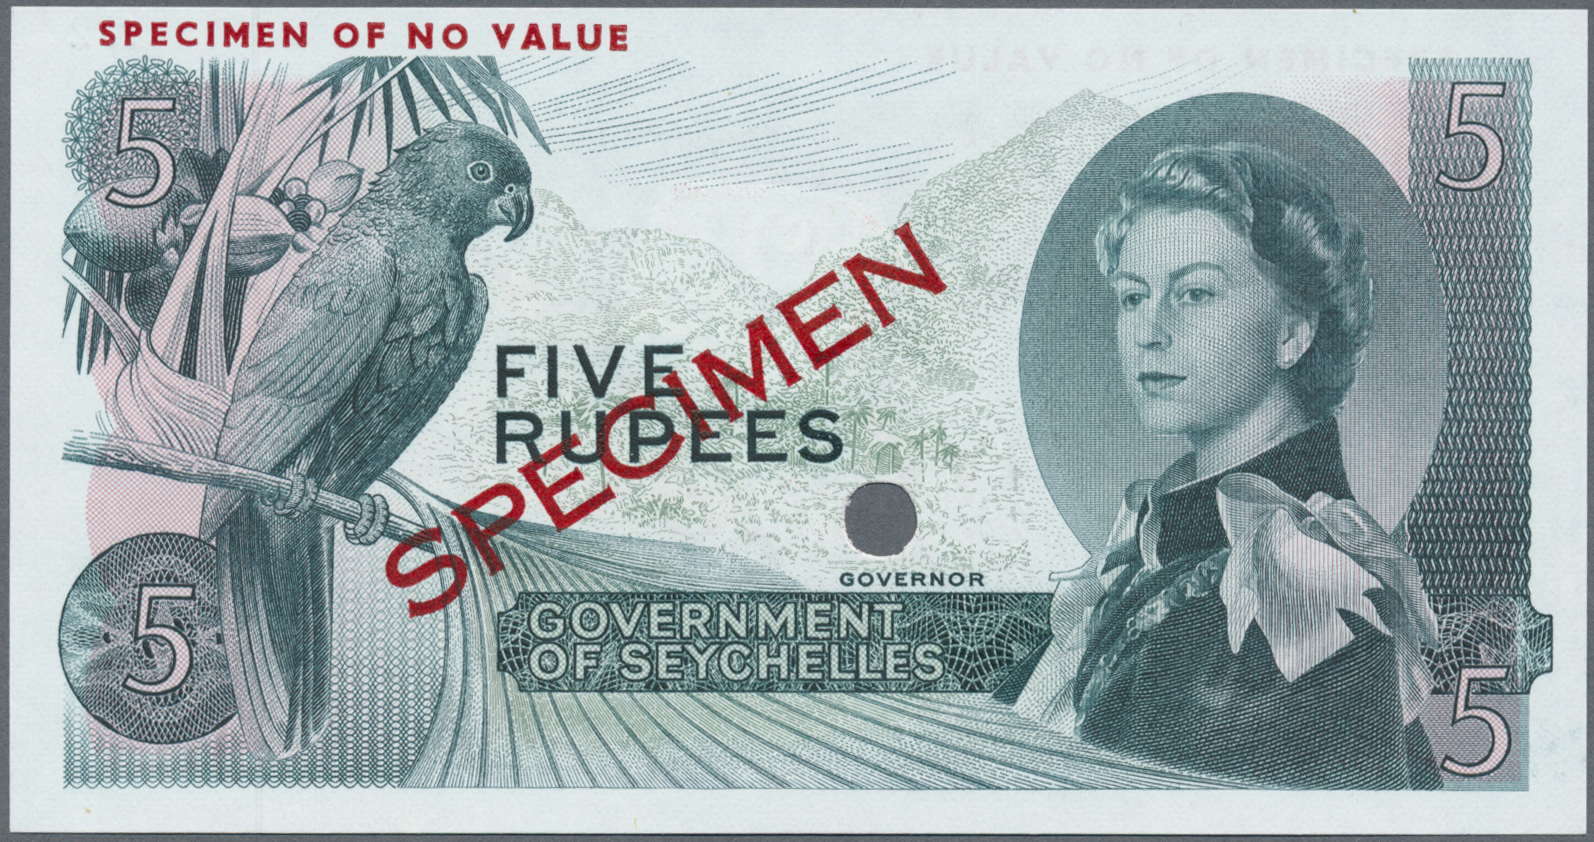 02891 Seychelles / Seychellen: Government Of Seychelles 5 Rupees 1968 Color Trial Specimen, P.14cts With Punch Hole Canc - Seychelles